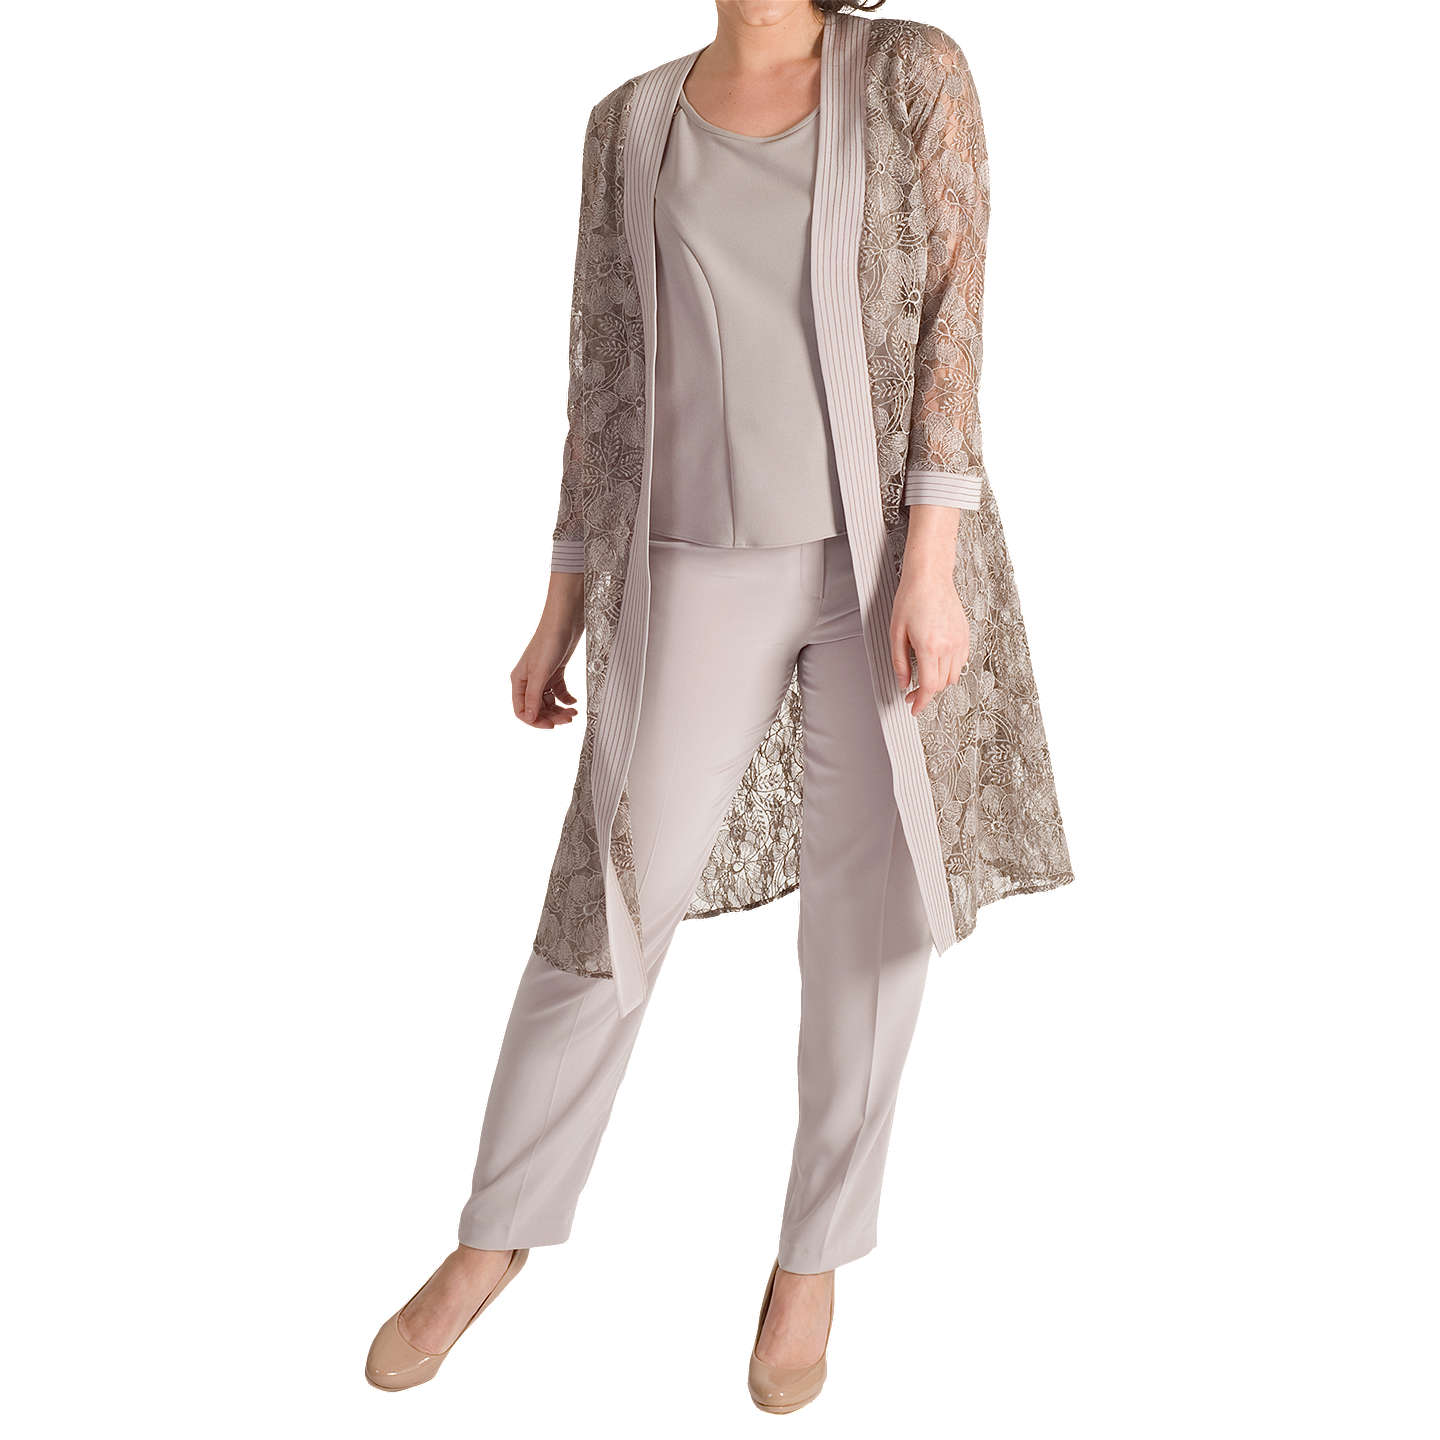 Chesca Embroidered Lace Coat, Mink at John Lewis